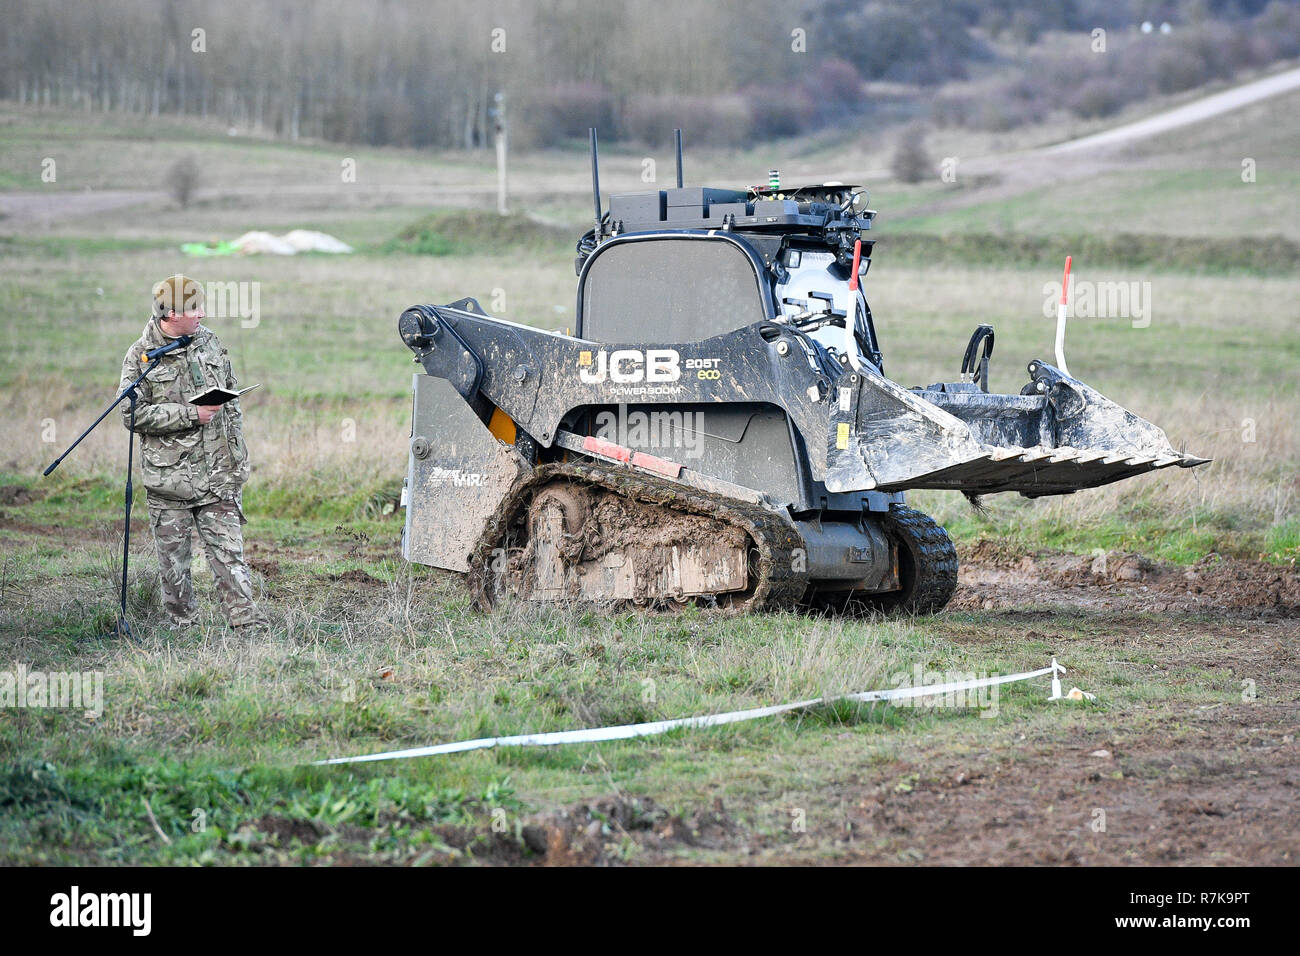 STANDALONE PHOTO An unmanned robotic autonomous JCB digger, used for breeching and clearing obstacles, is displayed on Salisbury Plain during exercise Autonomous Warrior 18, where military personnel, government departments and industry partners are taking part in Exercise Autonomous Warrior, working with NATO allies in a groundbreaking exercise to understand how the military can exploit technology in robotic and autonomous situations. Stock Photo